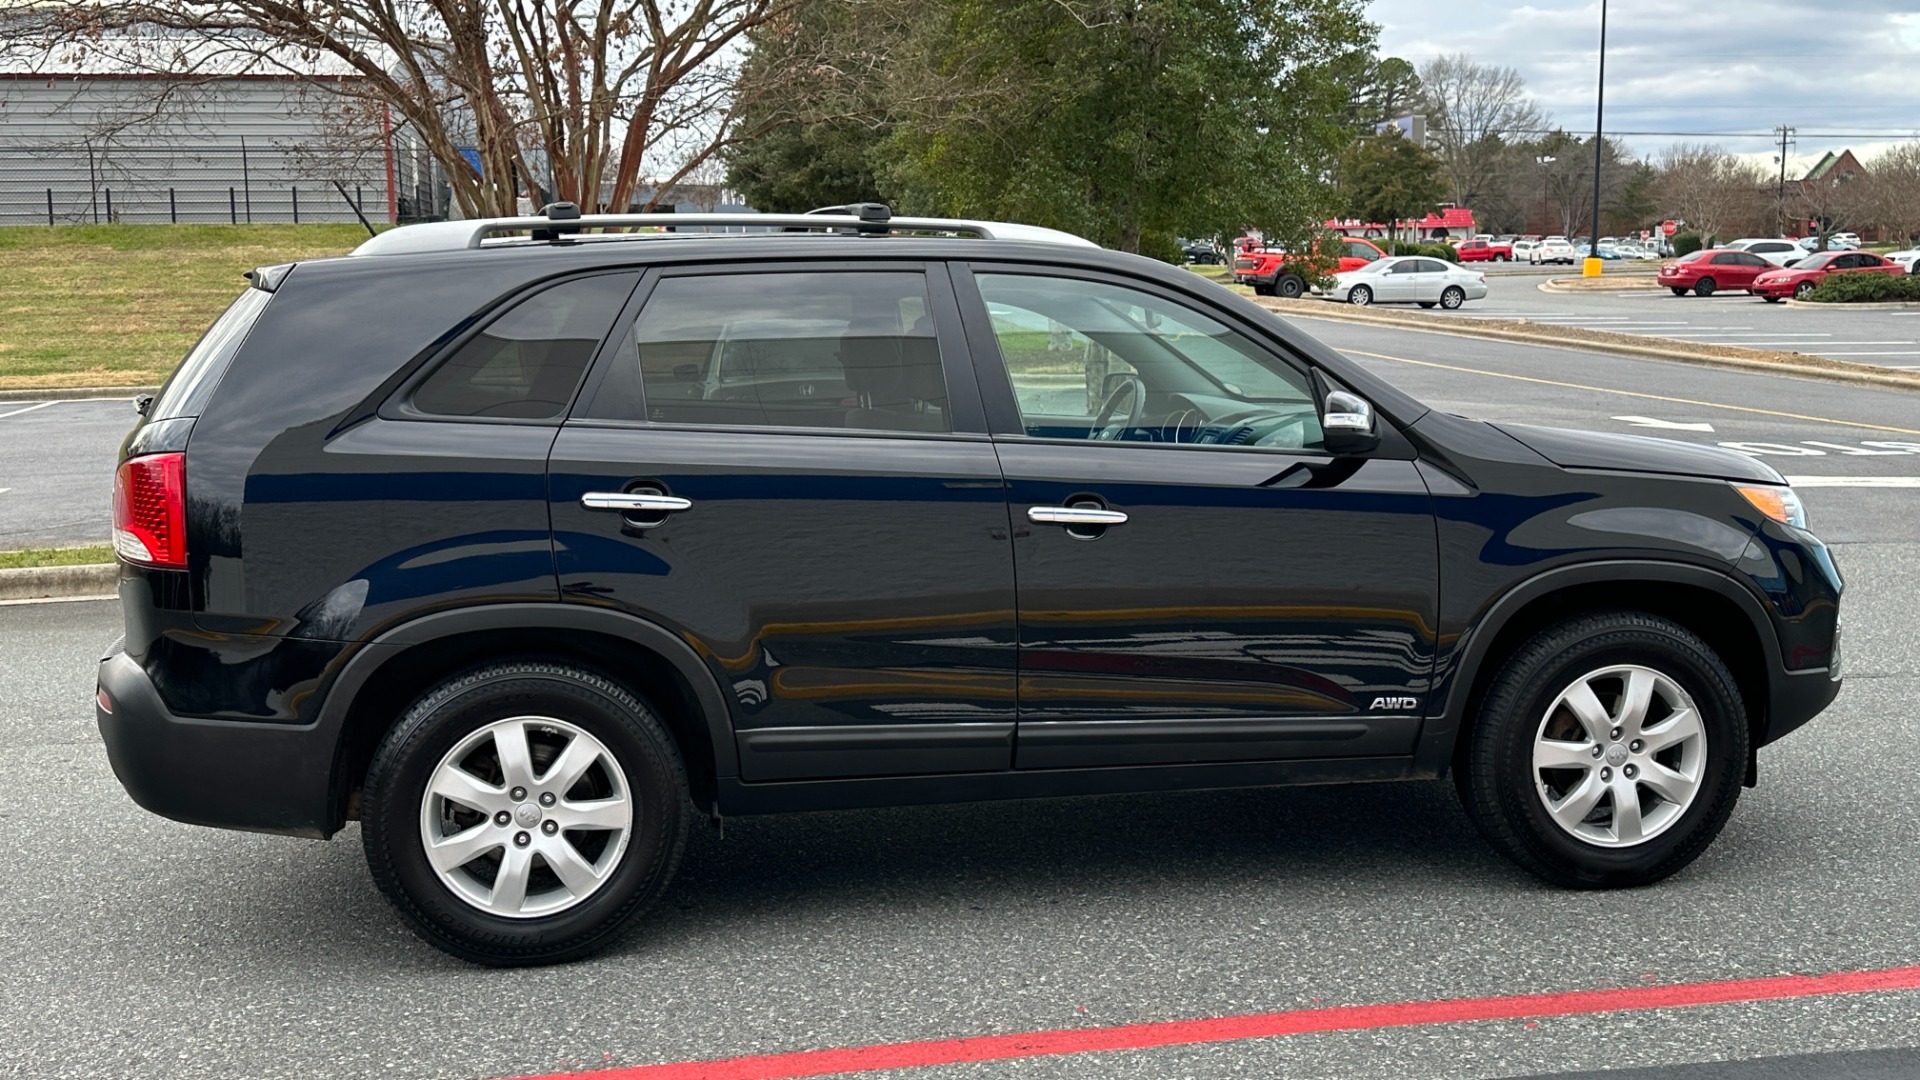 Used 2013 Kia Sorento LX / CONVENIENCE / AWD / 4CYL / CLOTH INTERIOR / ROOF RACK for sale $9,395 at Formula Imports in Charlotte NC 28227 3